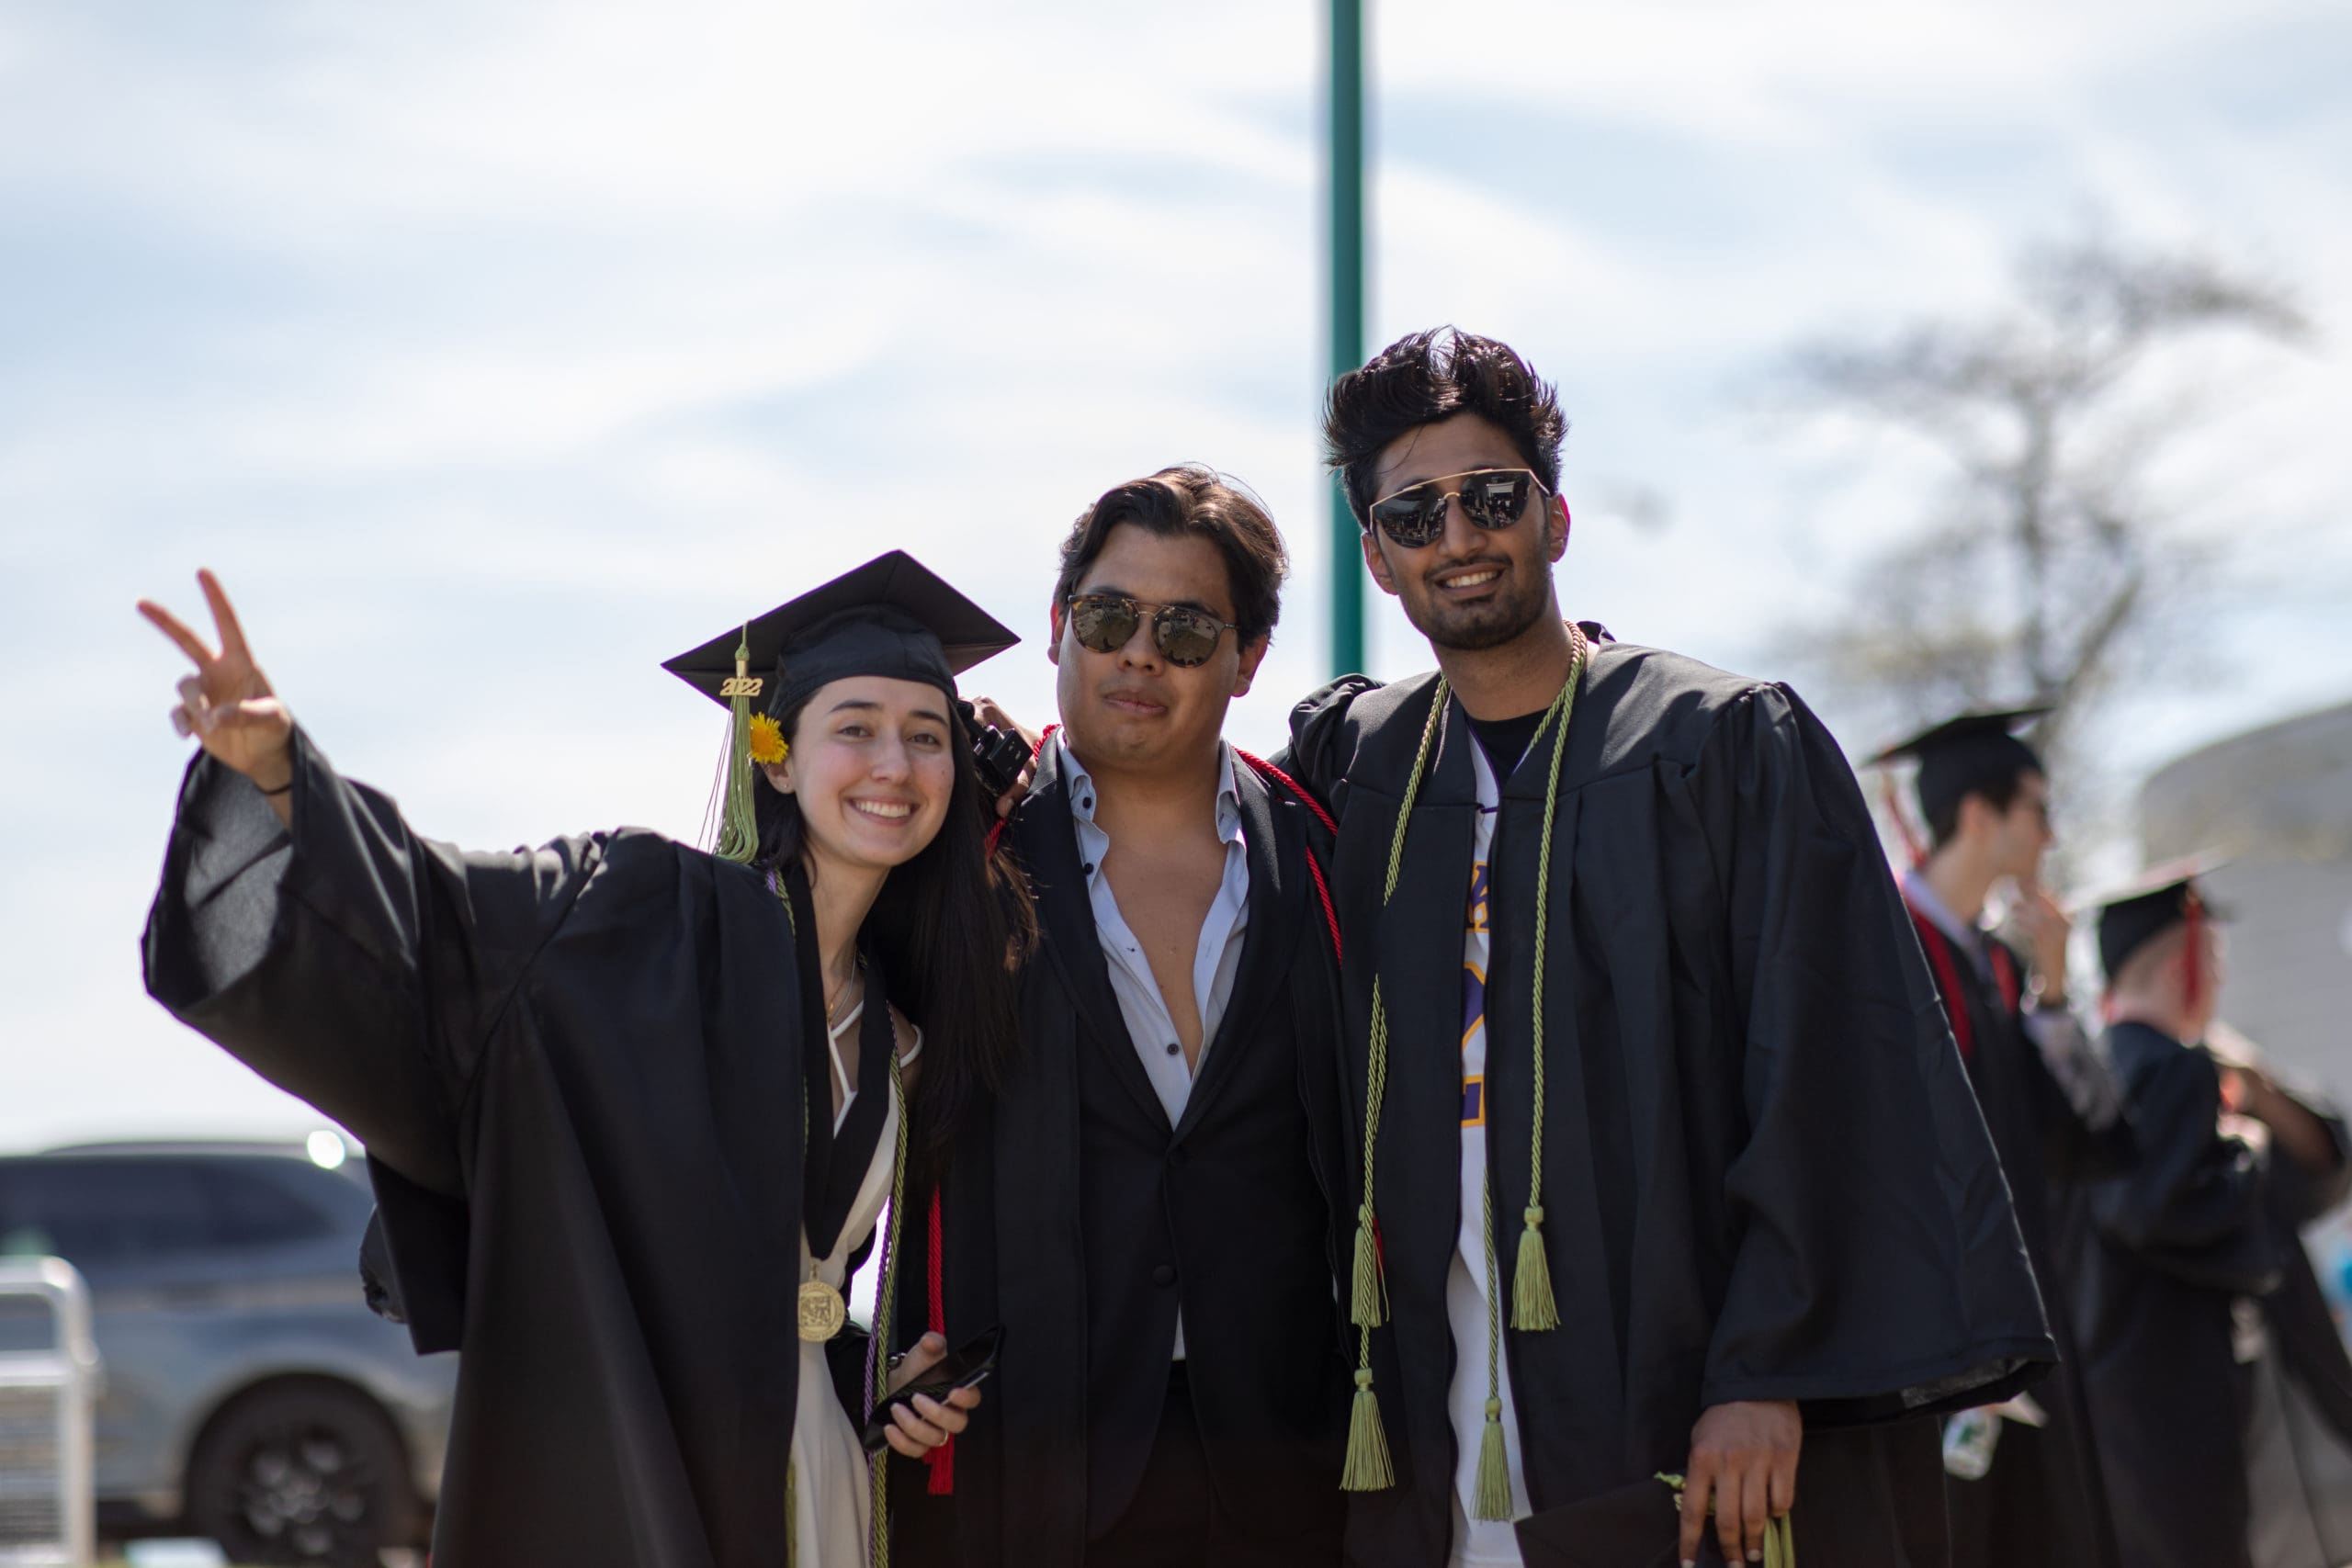 Three CCS graduates in black graduation robes and multicolored cords smile and pose for a picture on a sunny day.